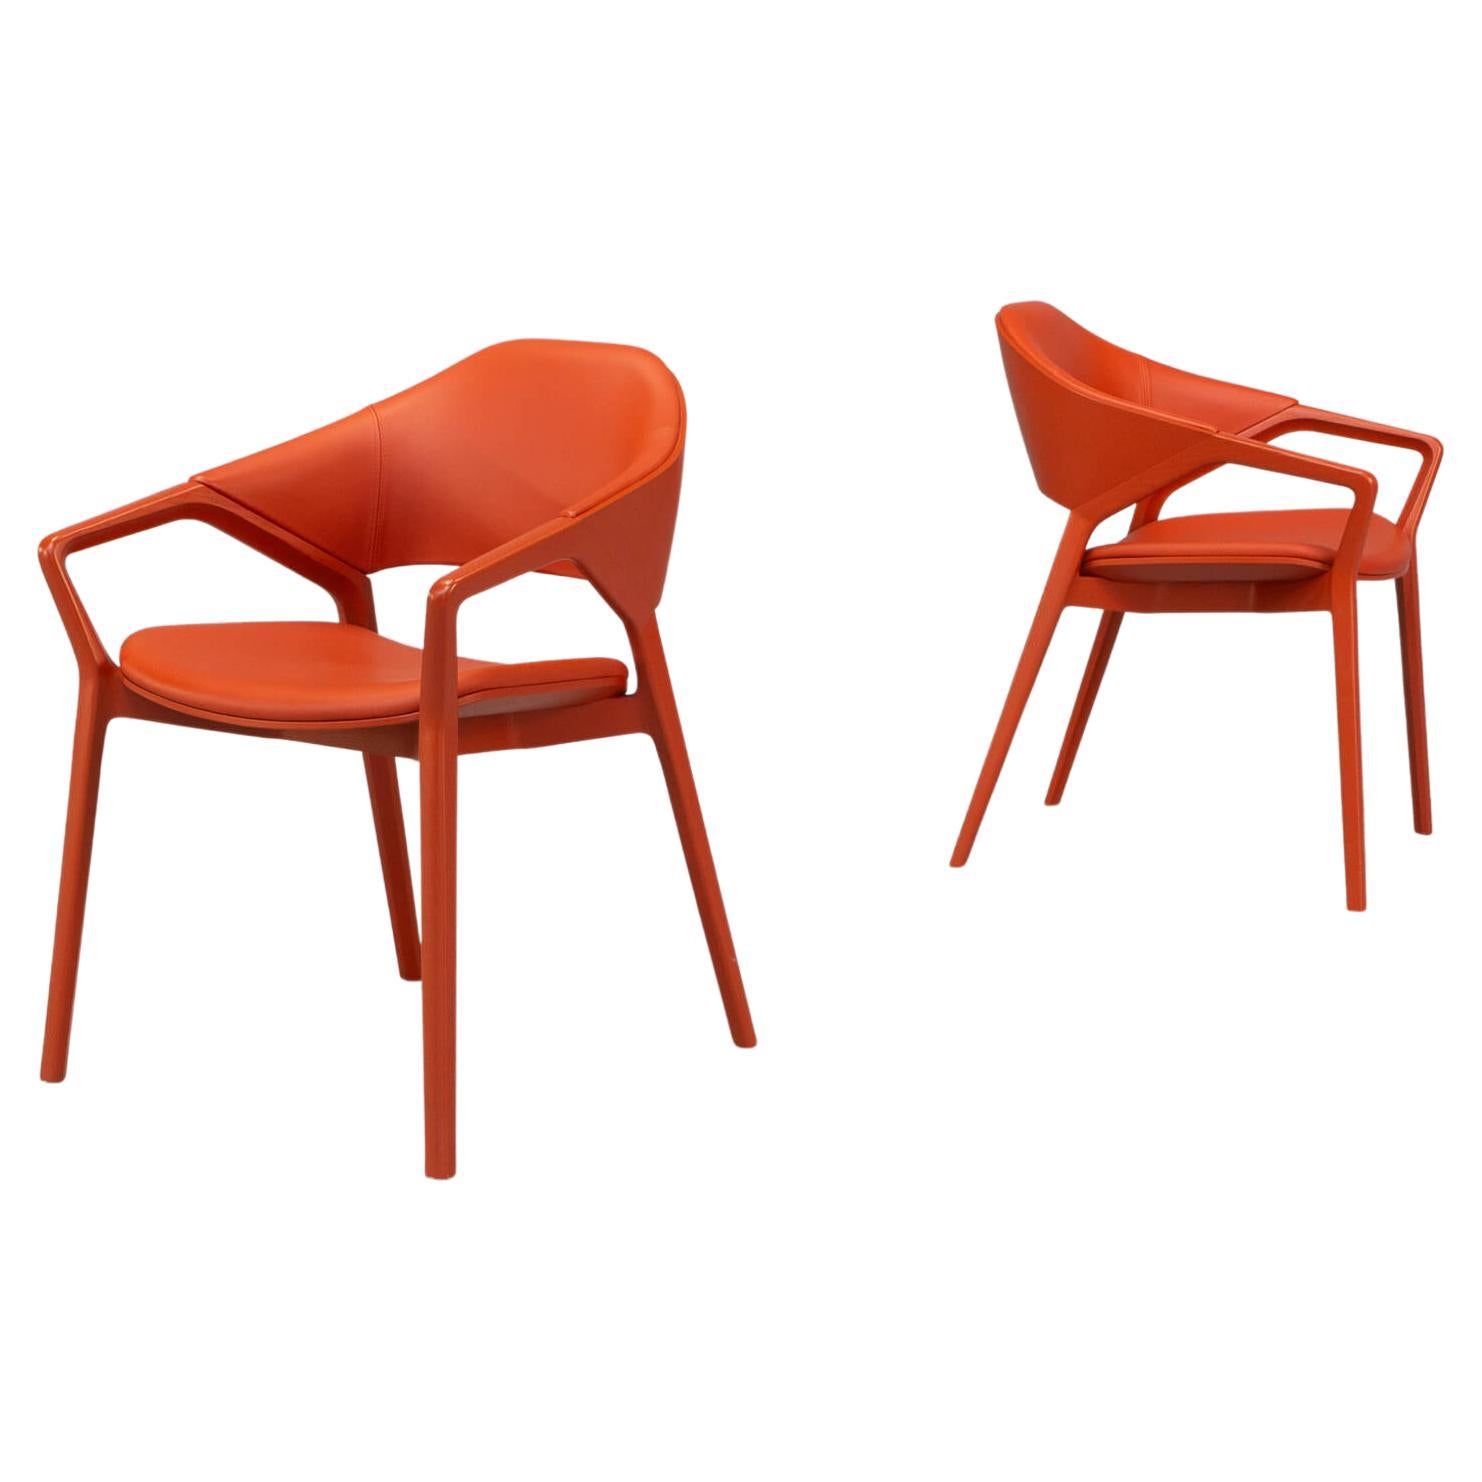 Ora Ito ‘133 Lco Chair or Cassina Set / 2 For Sale